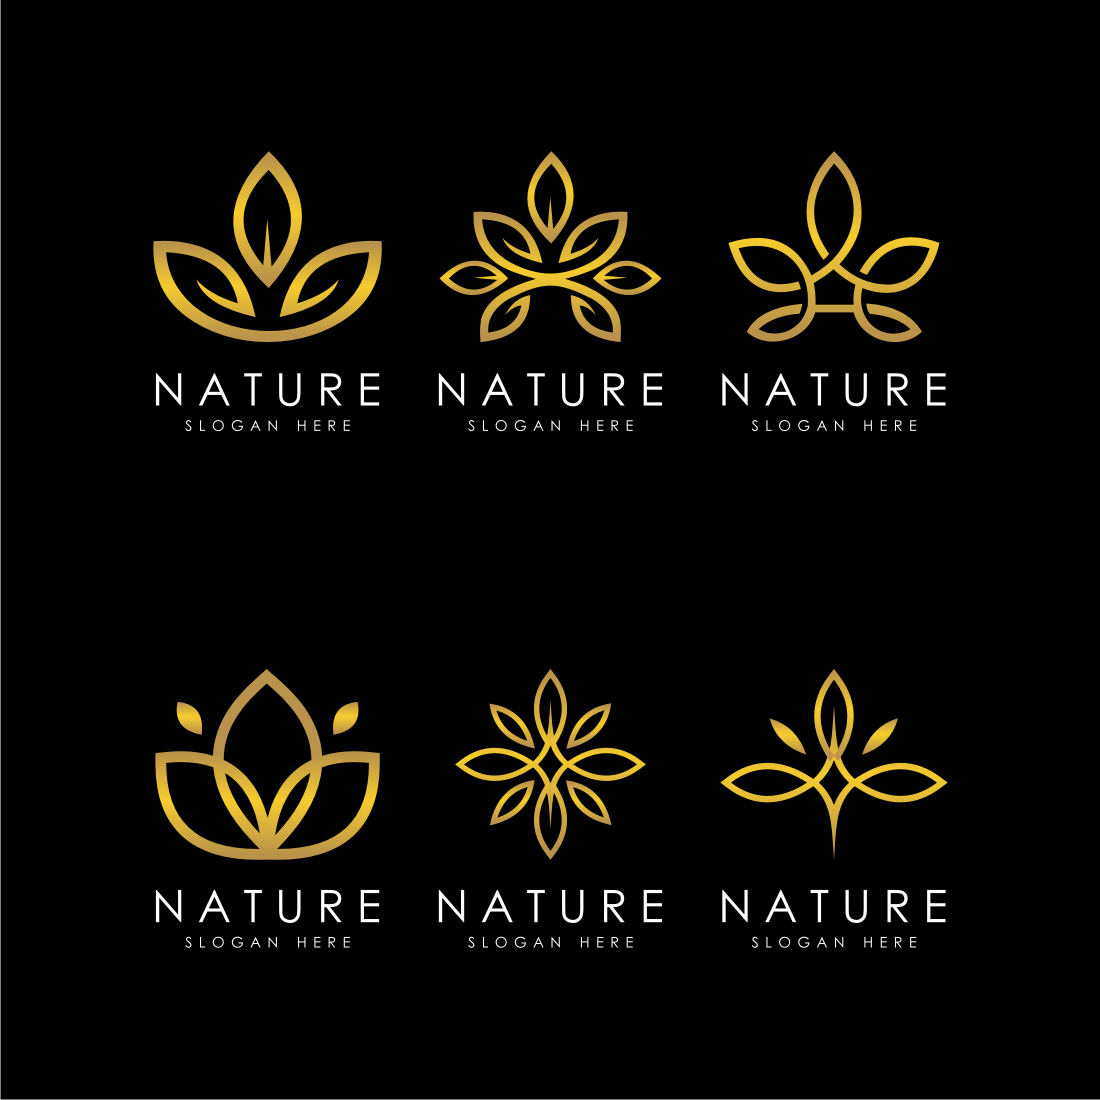 Flower Logo Vector Design preview with black background.